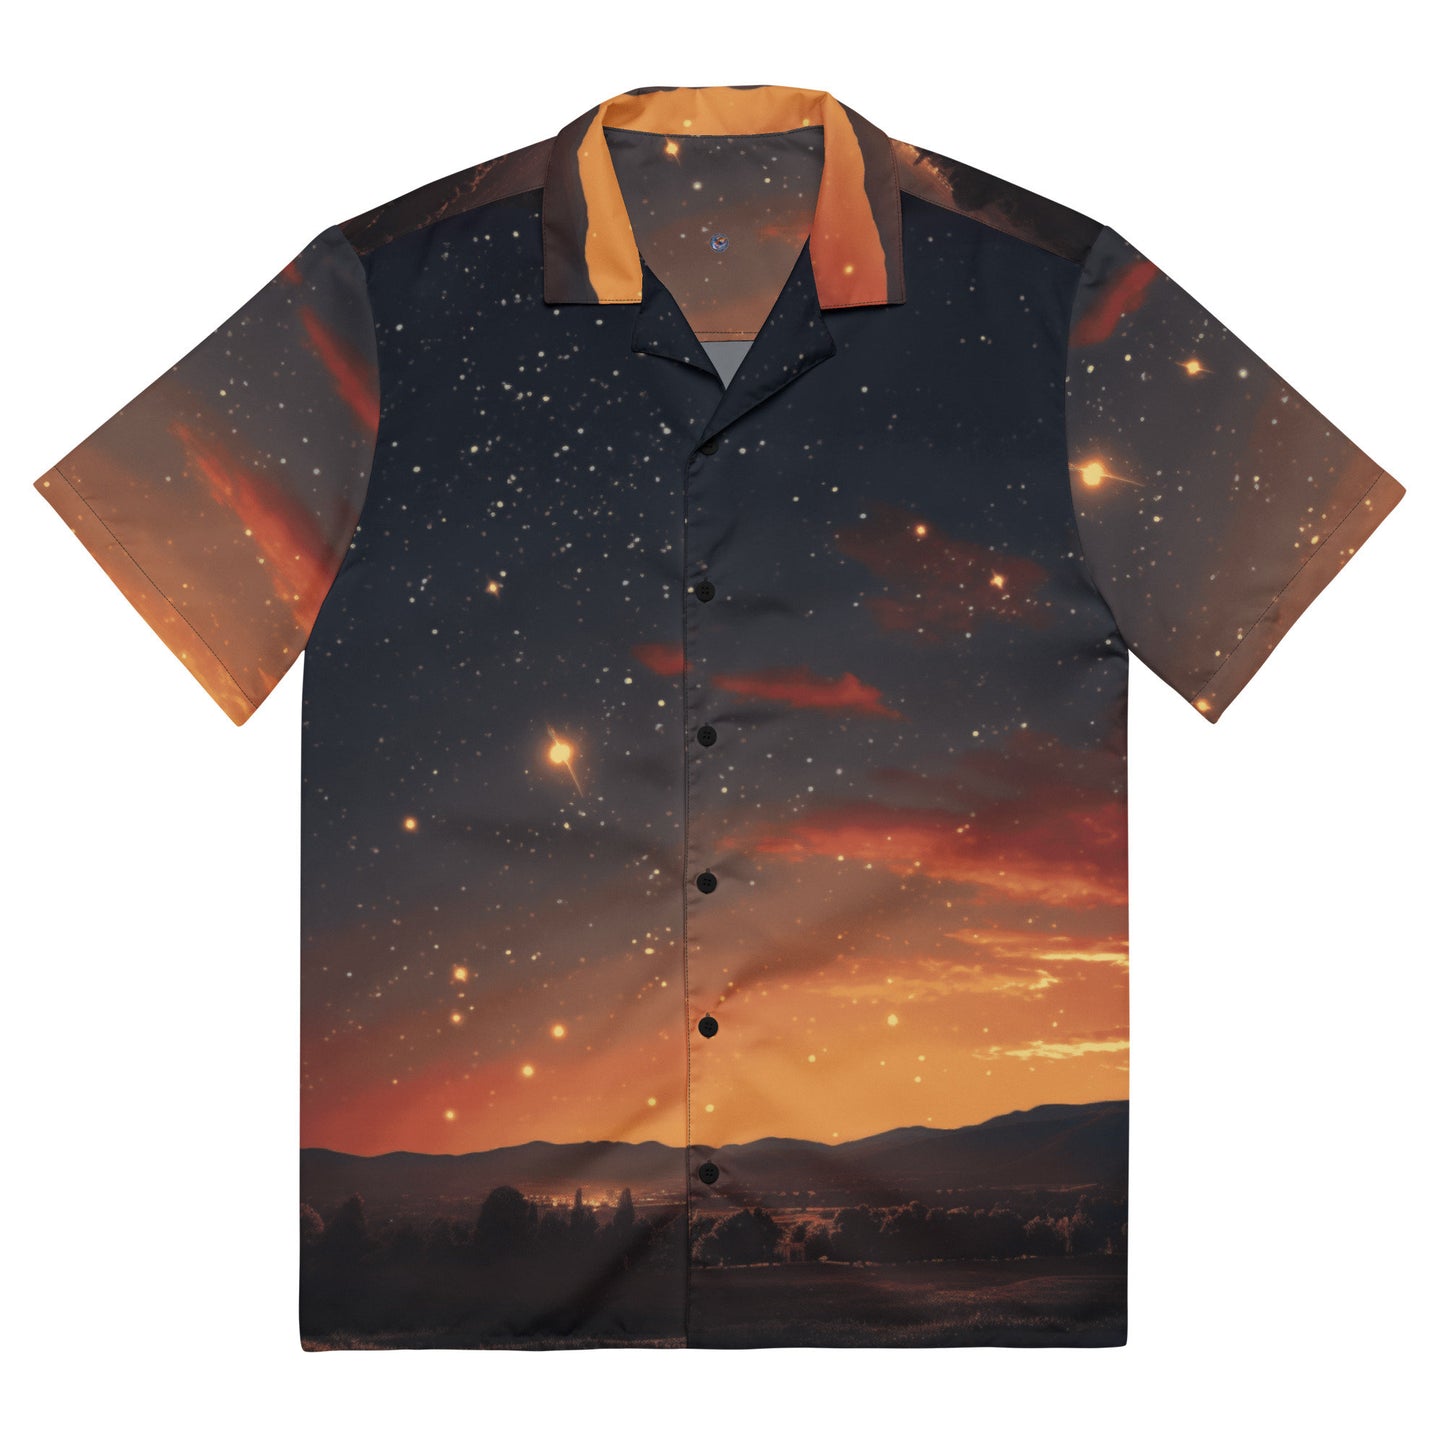 Funky Tiger® Gold Shooting Stars Button Down Shirt, Short Sleeve, Night Sky, Cosmic, For Men, Casual, Vacation, Beach